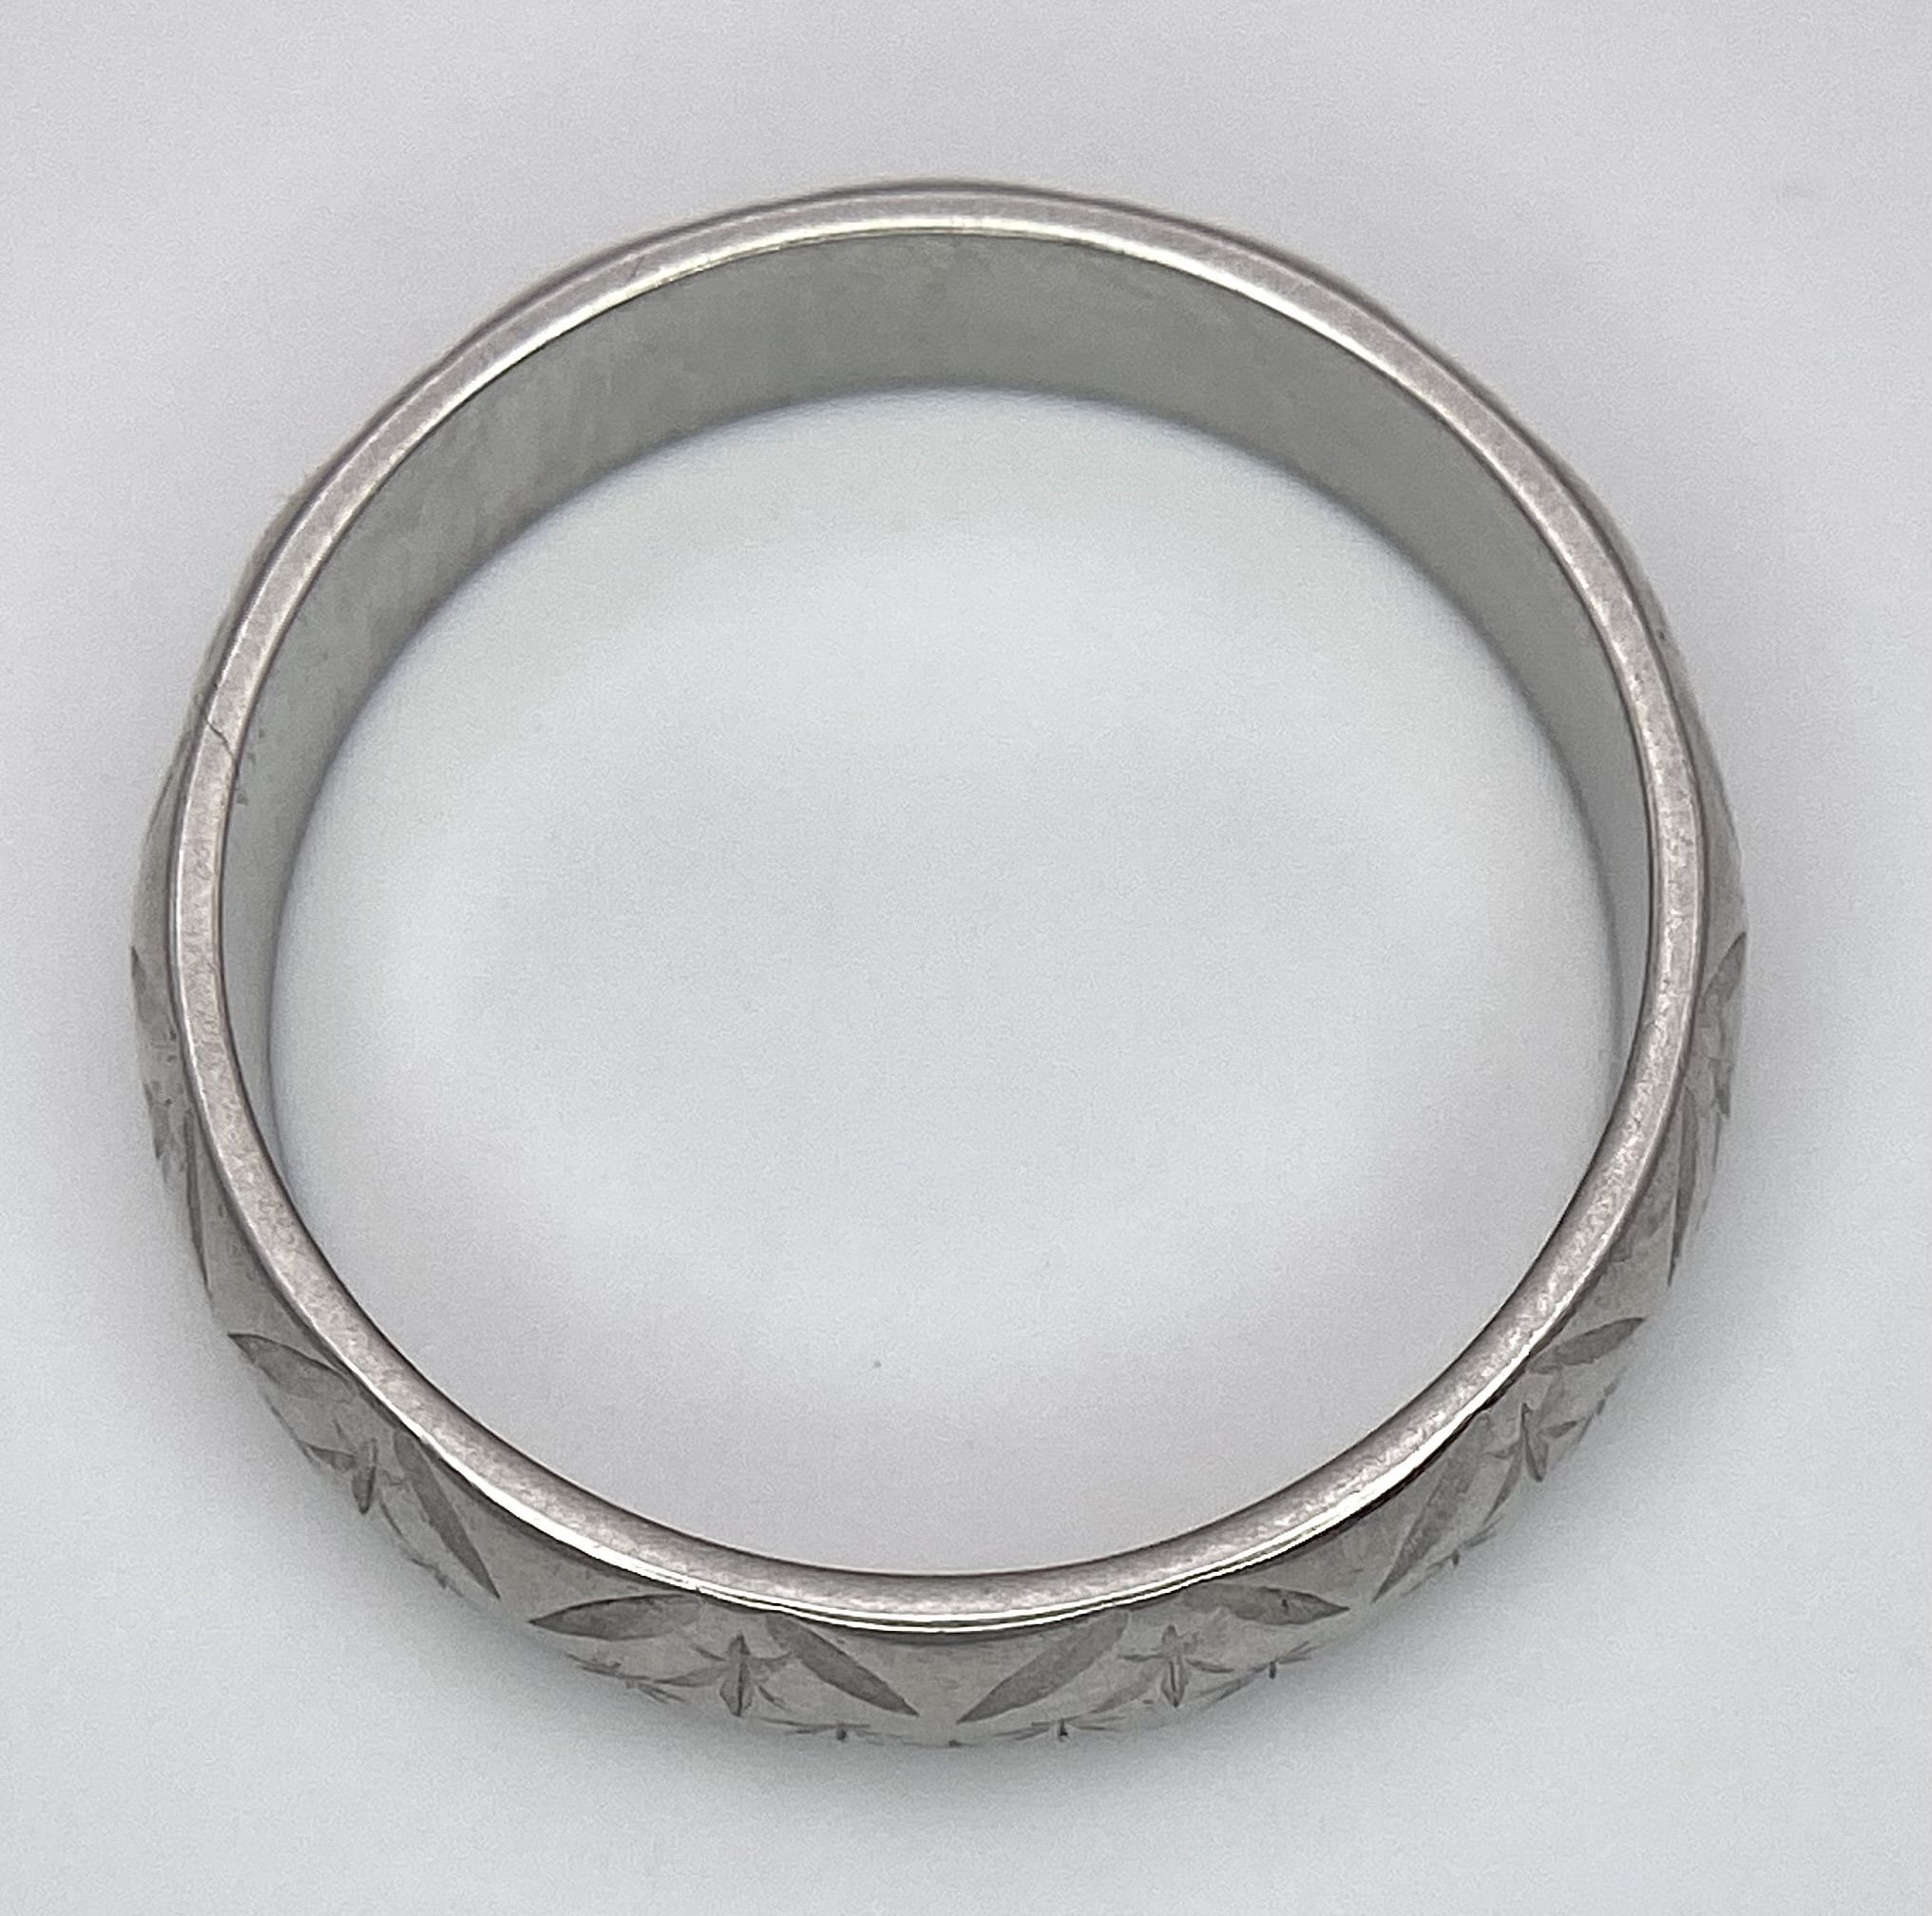 A Vintage Platinum Band Ring with Geometric Decorative Pattern. 5mm width. Size P. 7.5g - Image 5 of 6